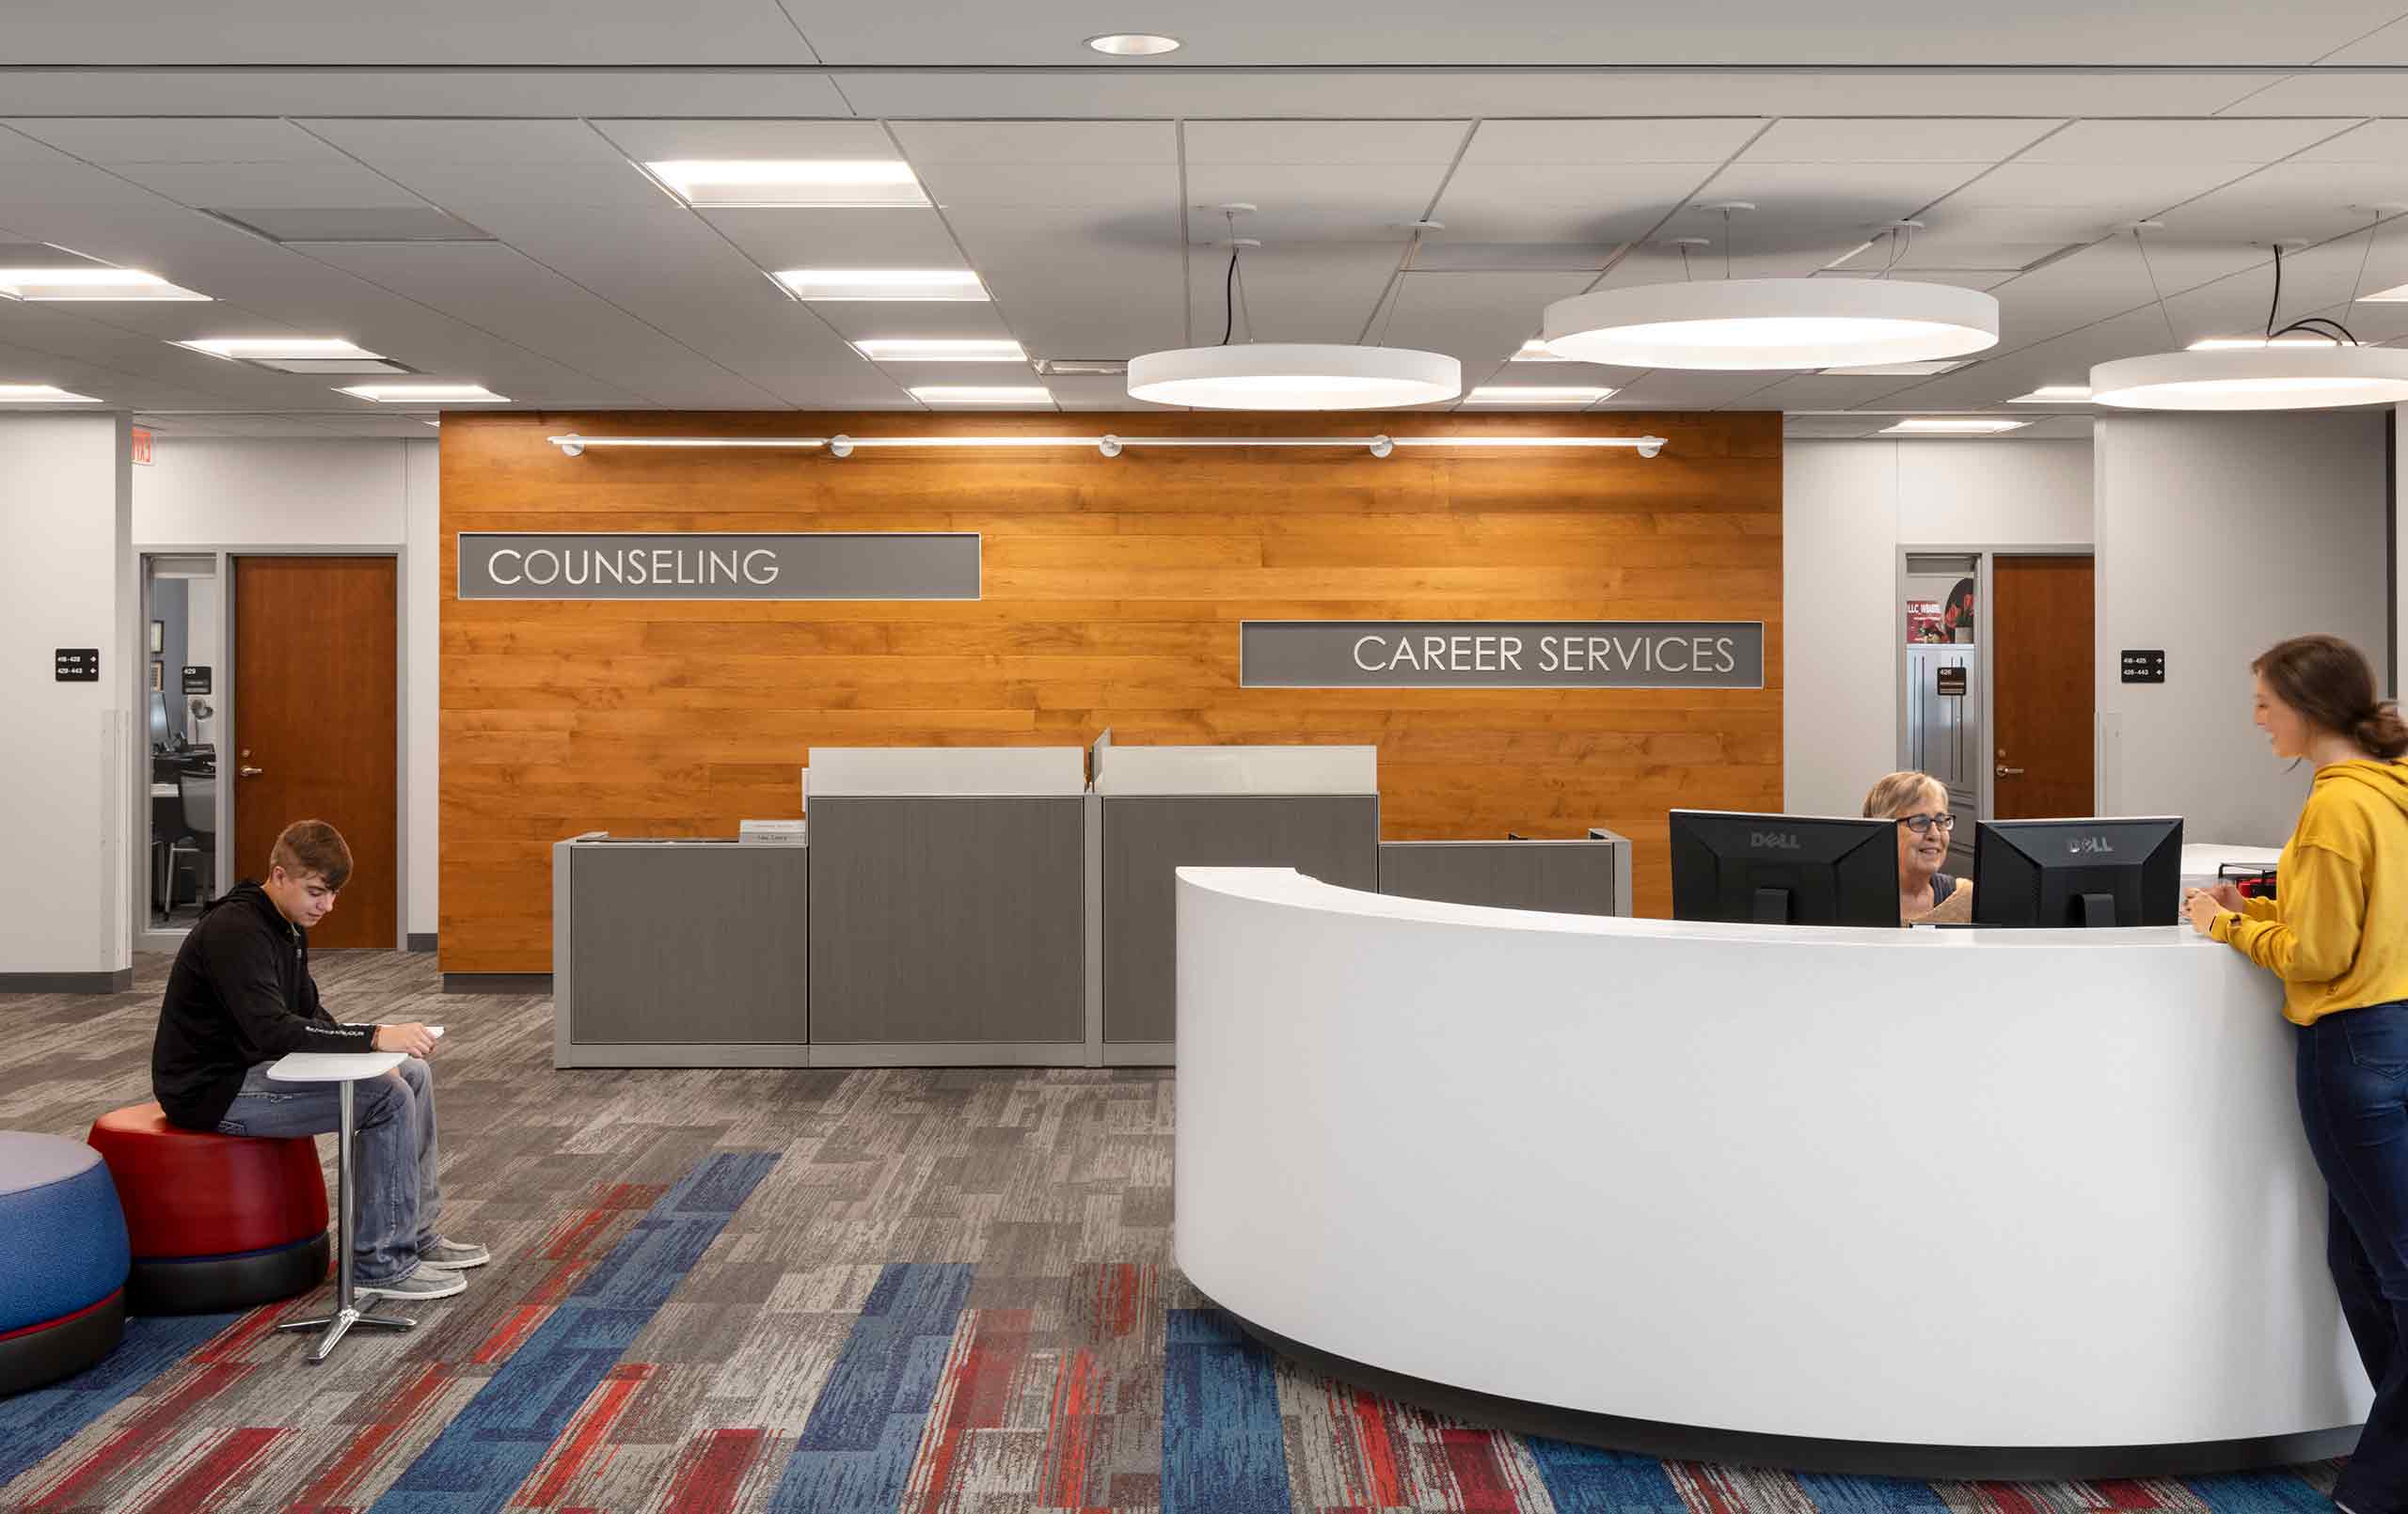 College careers and counseling reception area
